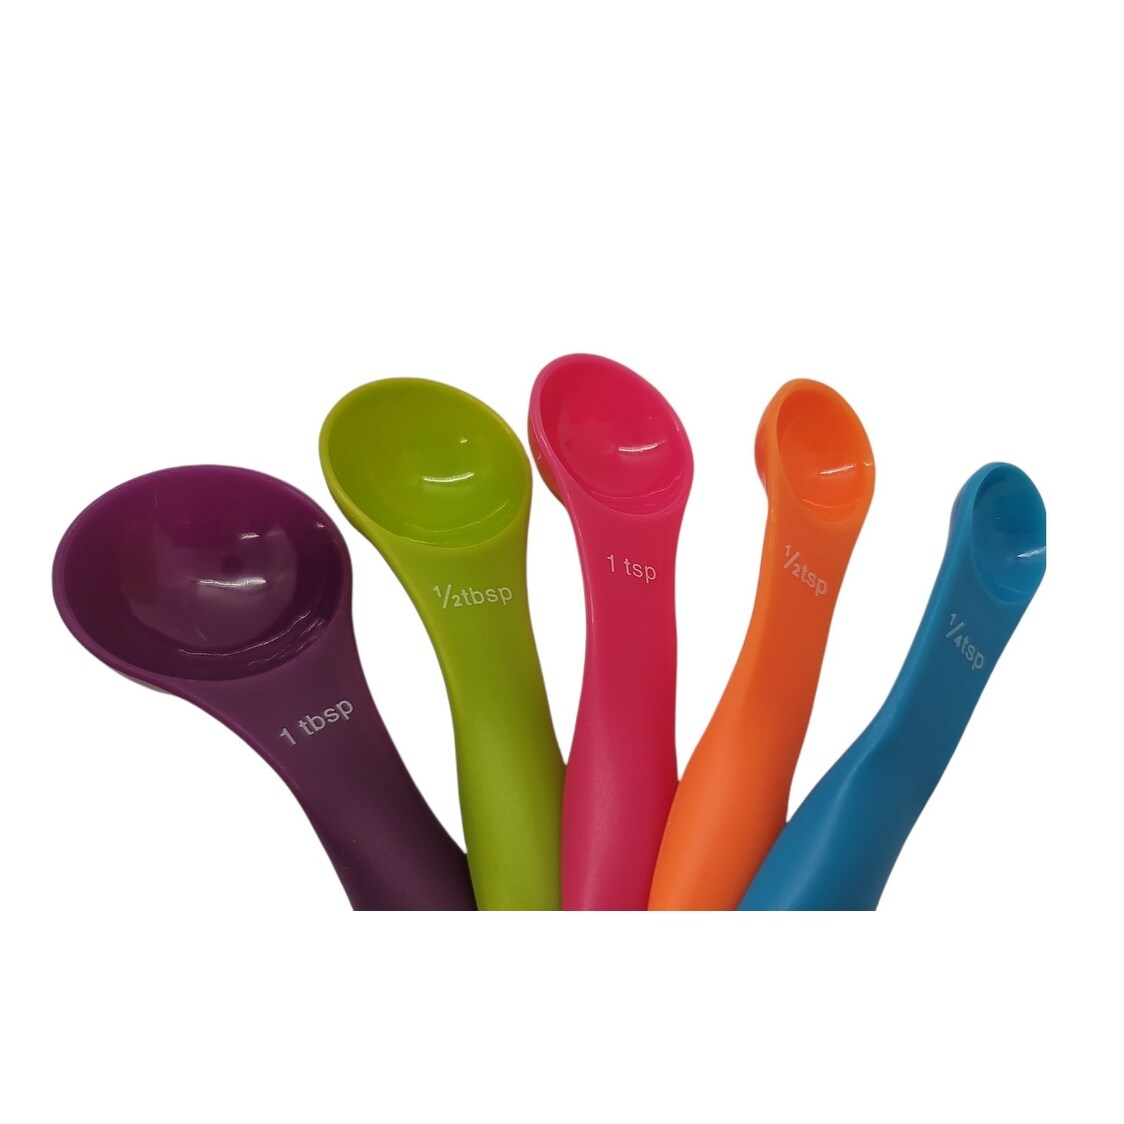 https://ak1.ostkcdn.com/images/products/is/images/direct/0f98f4baa4dbe4a9fc363001986af2e5bdf2c9a4/5-Piece-Colorful-Plastic-Nesting-Measuring-Spoon-Set---1-4-tsp-to-1-tbsp-for-Dry-or-Liquid-Ingredients.jpg